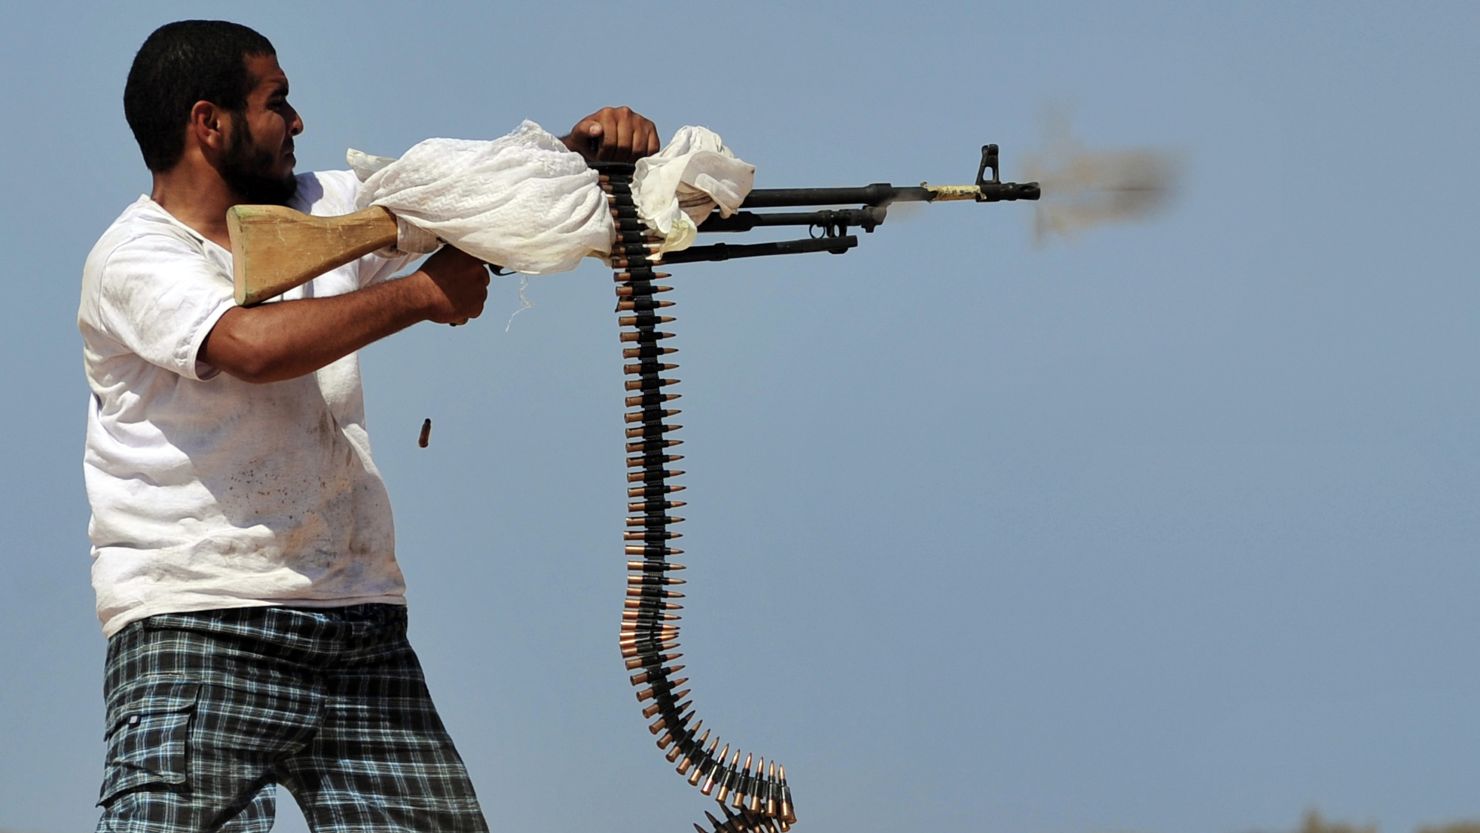 A National Transitional Council fighter practices firing his machine gun, 20 kilometers west of Sirte on September 26.